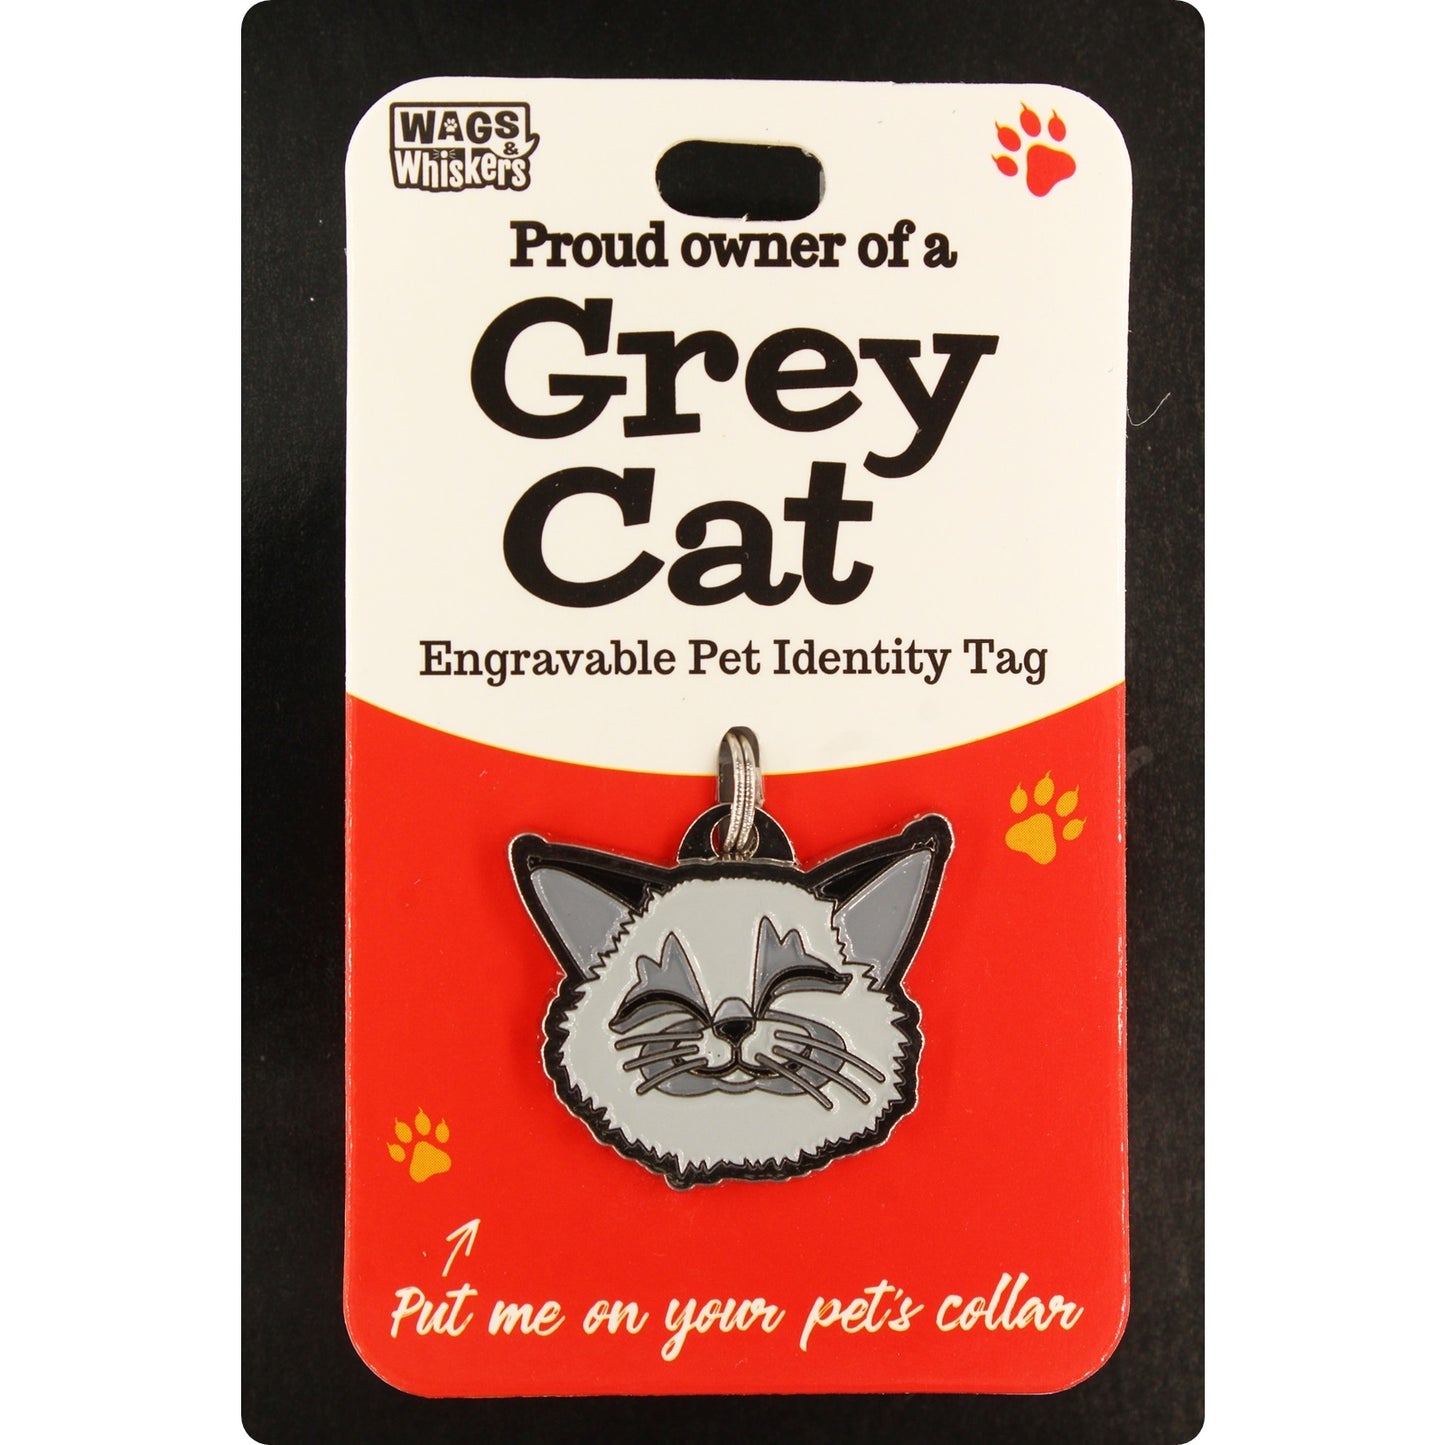 DESIRABLE GIFTS GREY CAT WAGS & WHISKERS CAT PET TAG I CAN NOT ENGRAVE THIS ITEM